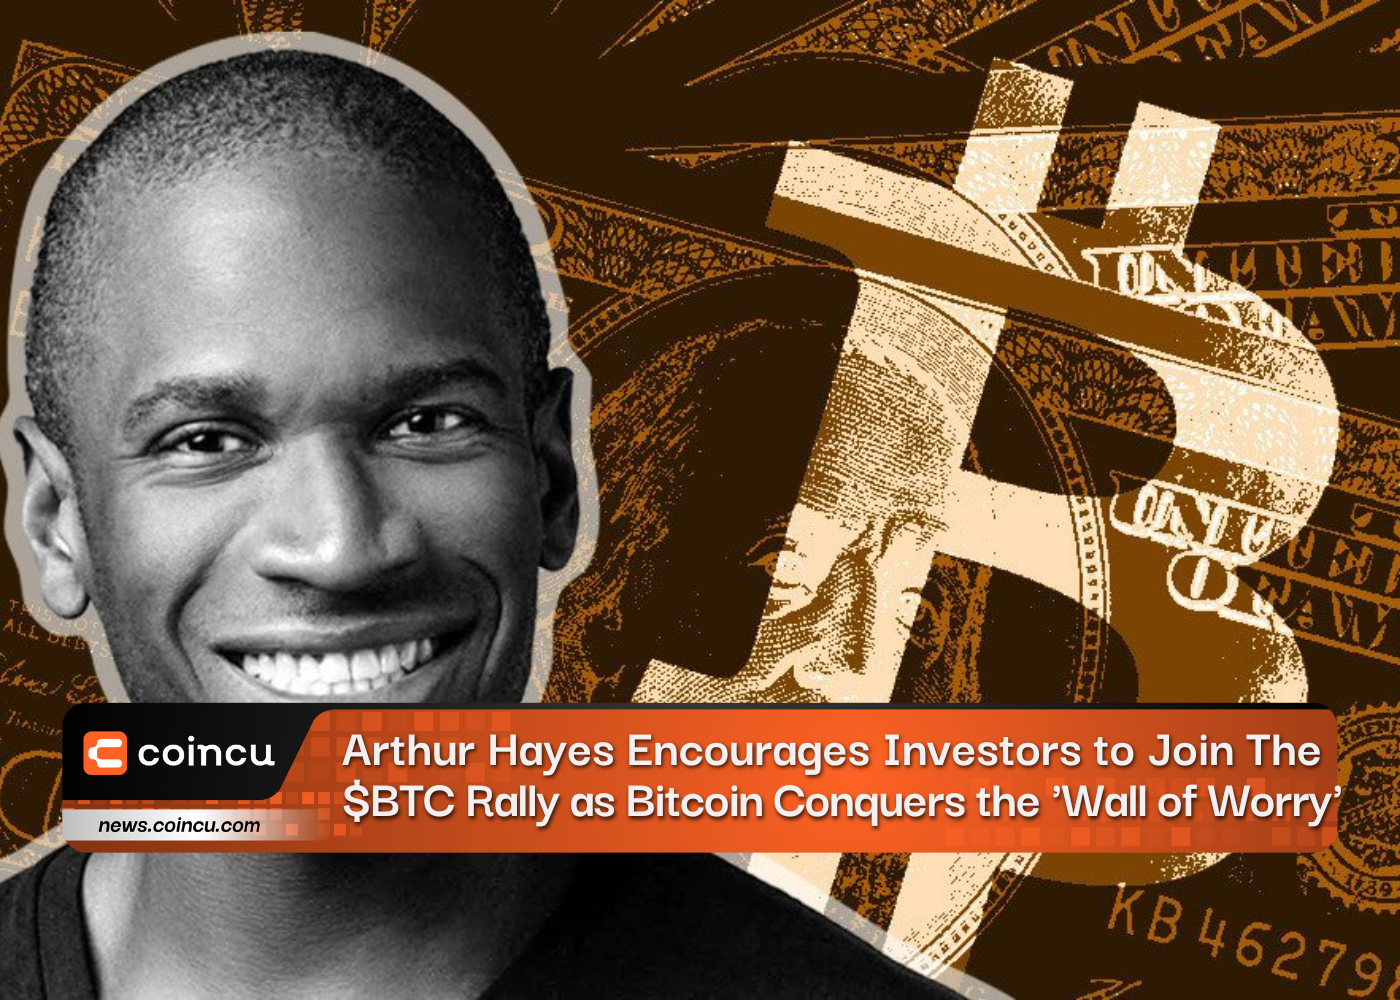 Arthur Hayes Encourages Investors to Join The